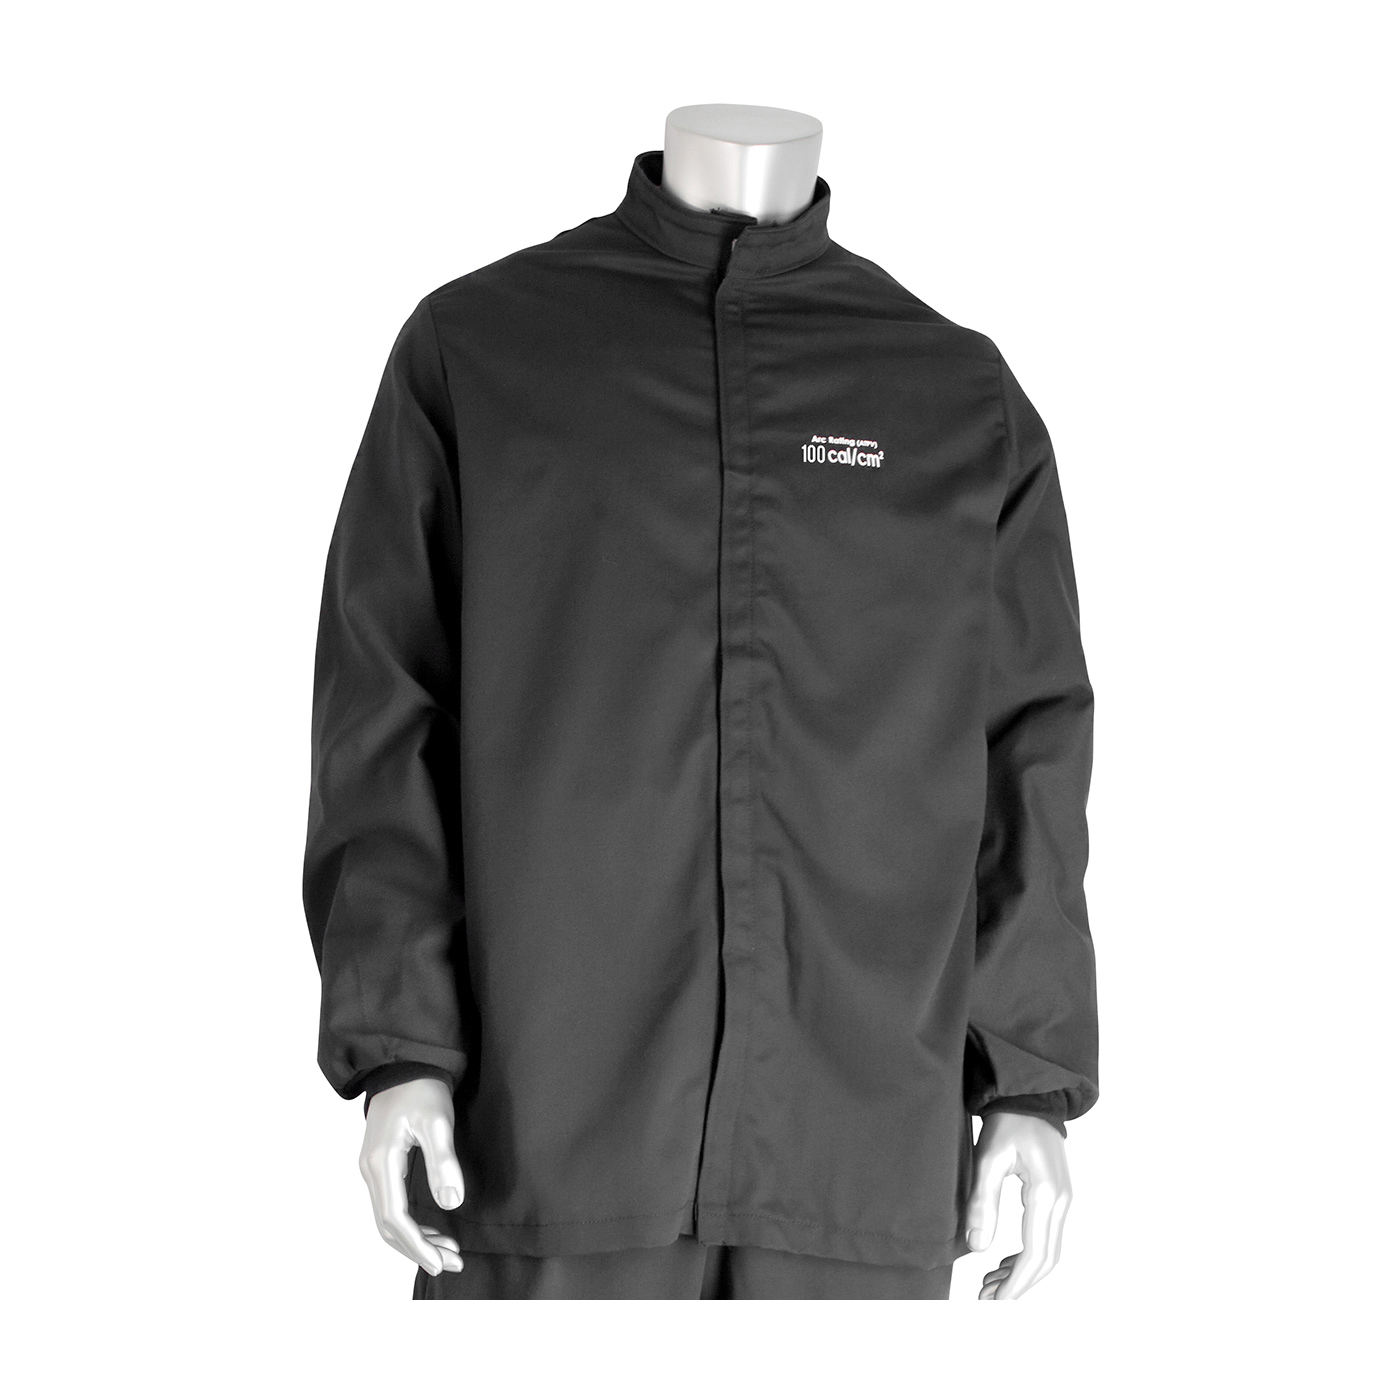 PIP® 9100-52750/5XL Arc and Flame Resistant Jacket, 5XL, Gray, Aramid/Cotton, 64 to 66 in Chest, Resists: Arc and Flame, ASTM F1506-10a, ASTM F2178-12